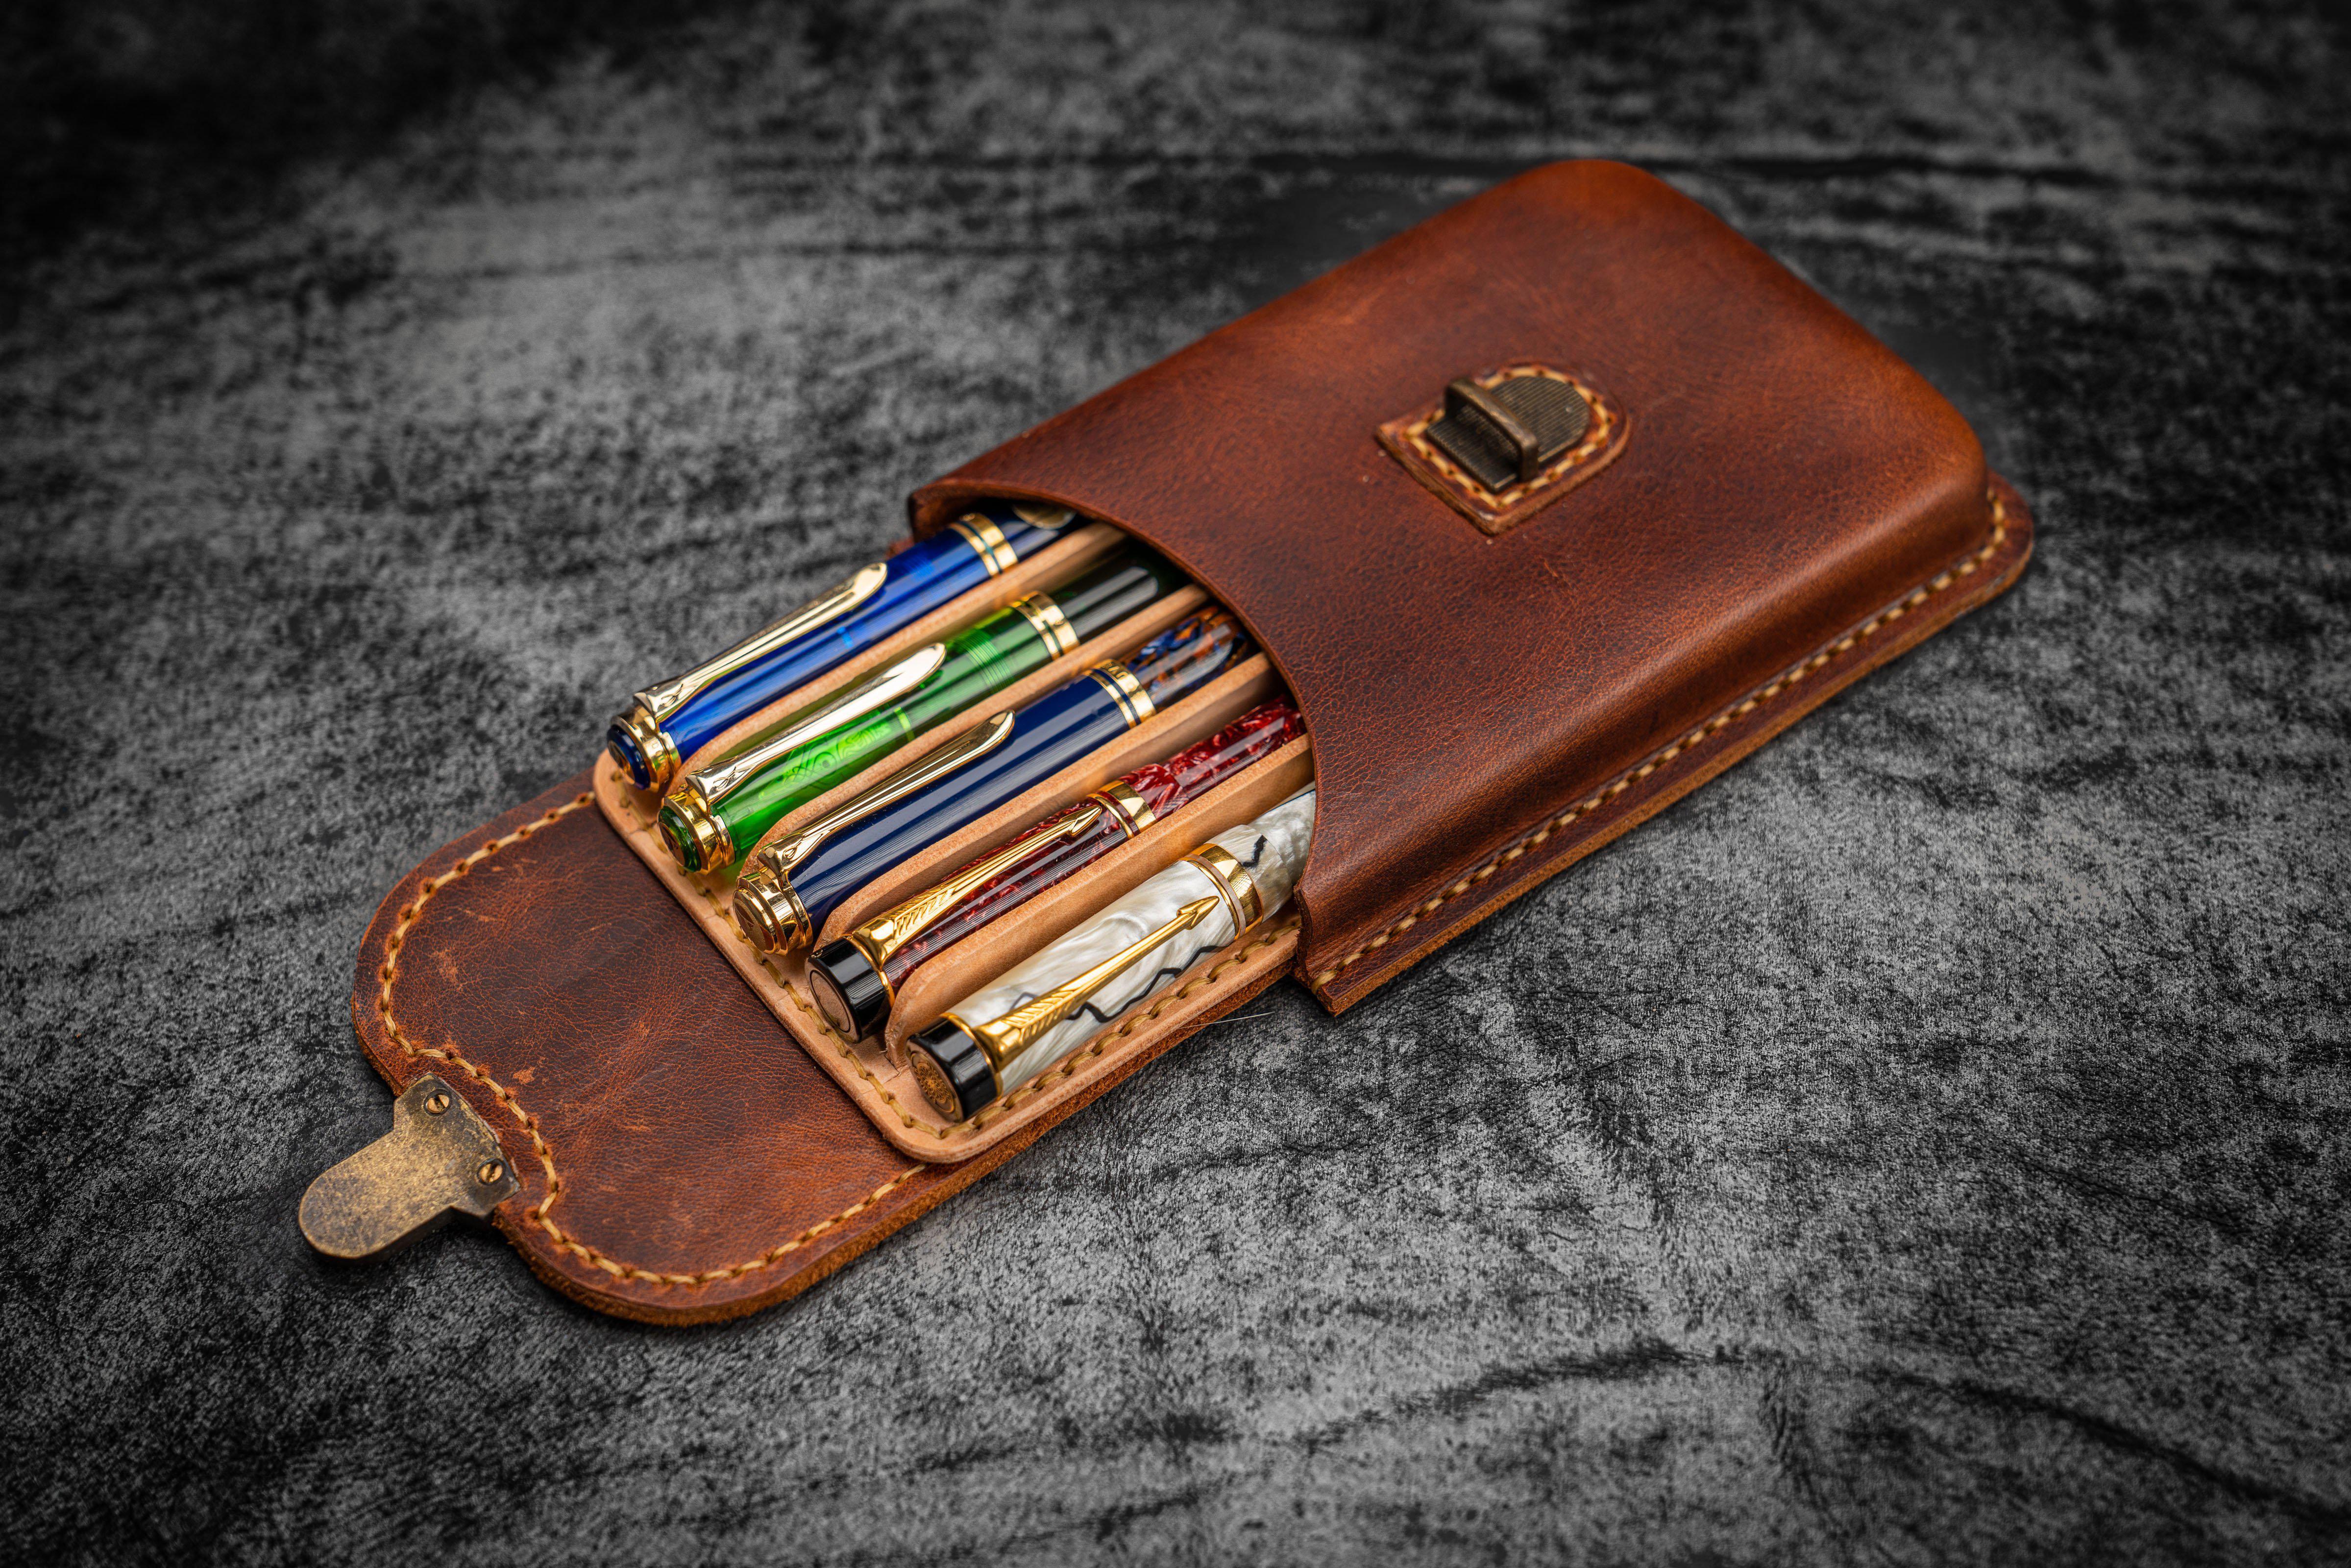 Leather Molded for 5 Pens - Distressed | Galen Leather